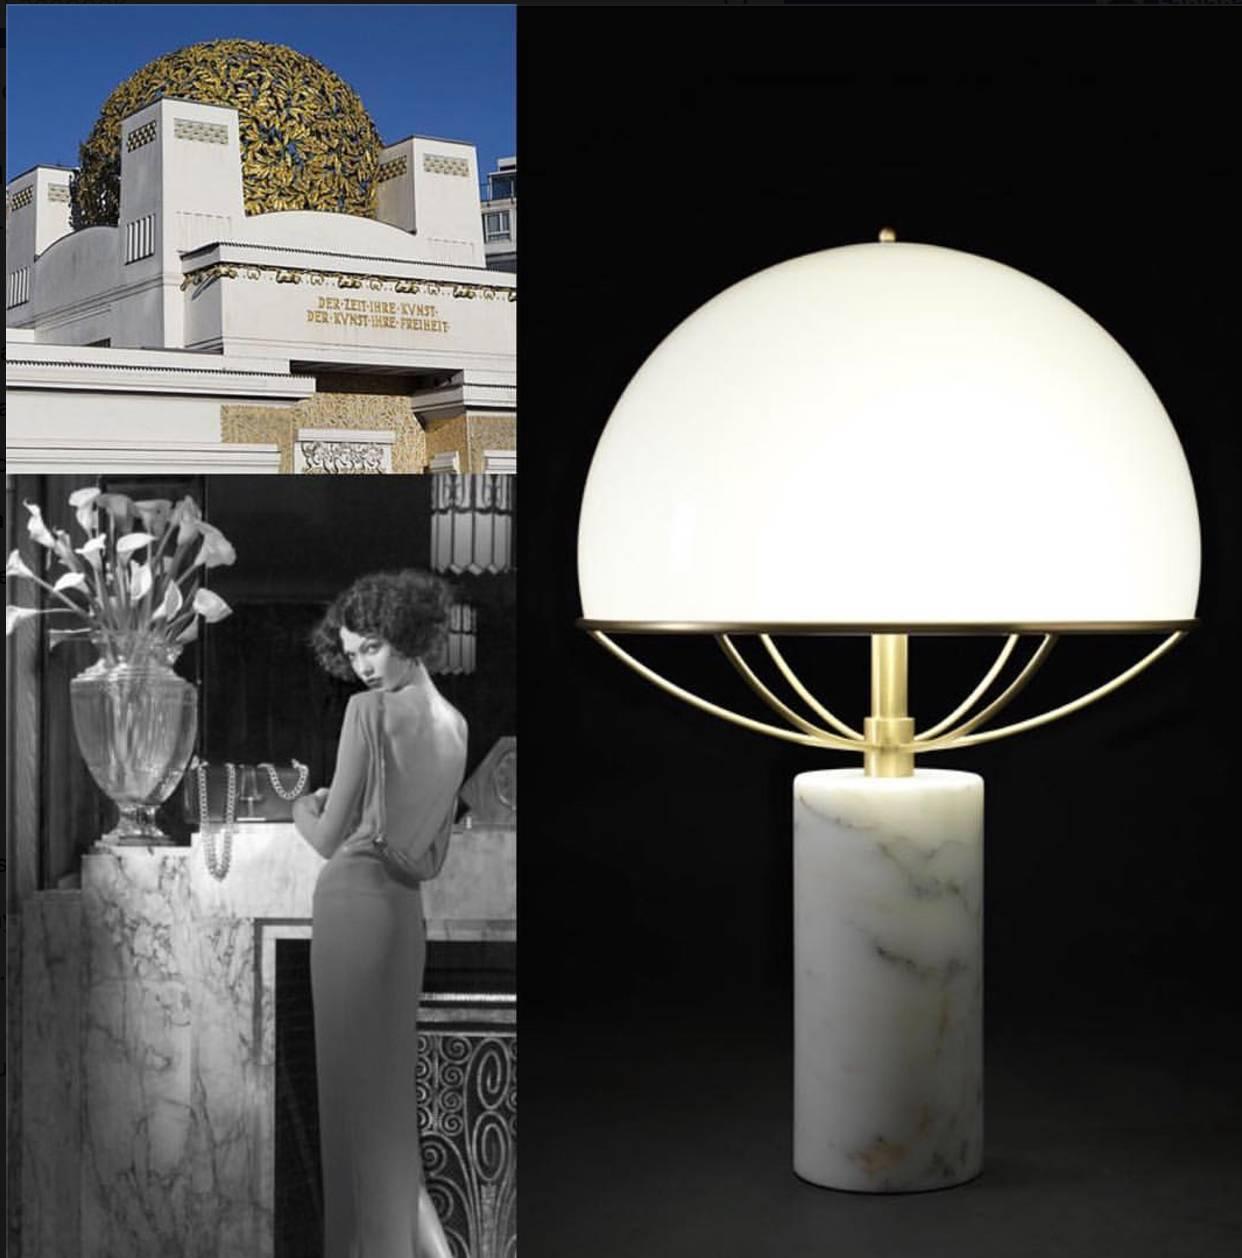 Italian hand-made table/night stand lamp with Carrara marble base, milky glass and brass. 

All pieces are made by artisans at the Lago Maggiore area, with local materials and decade-long industrial knowledge. 

The lamp gives a warm, diffused